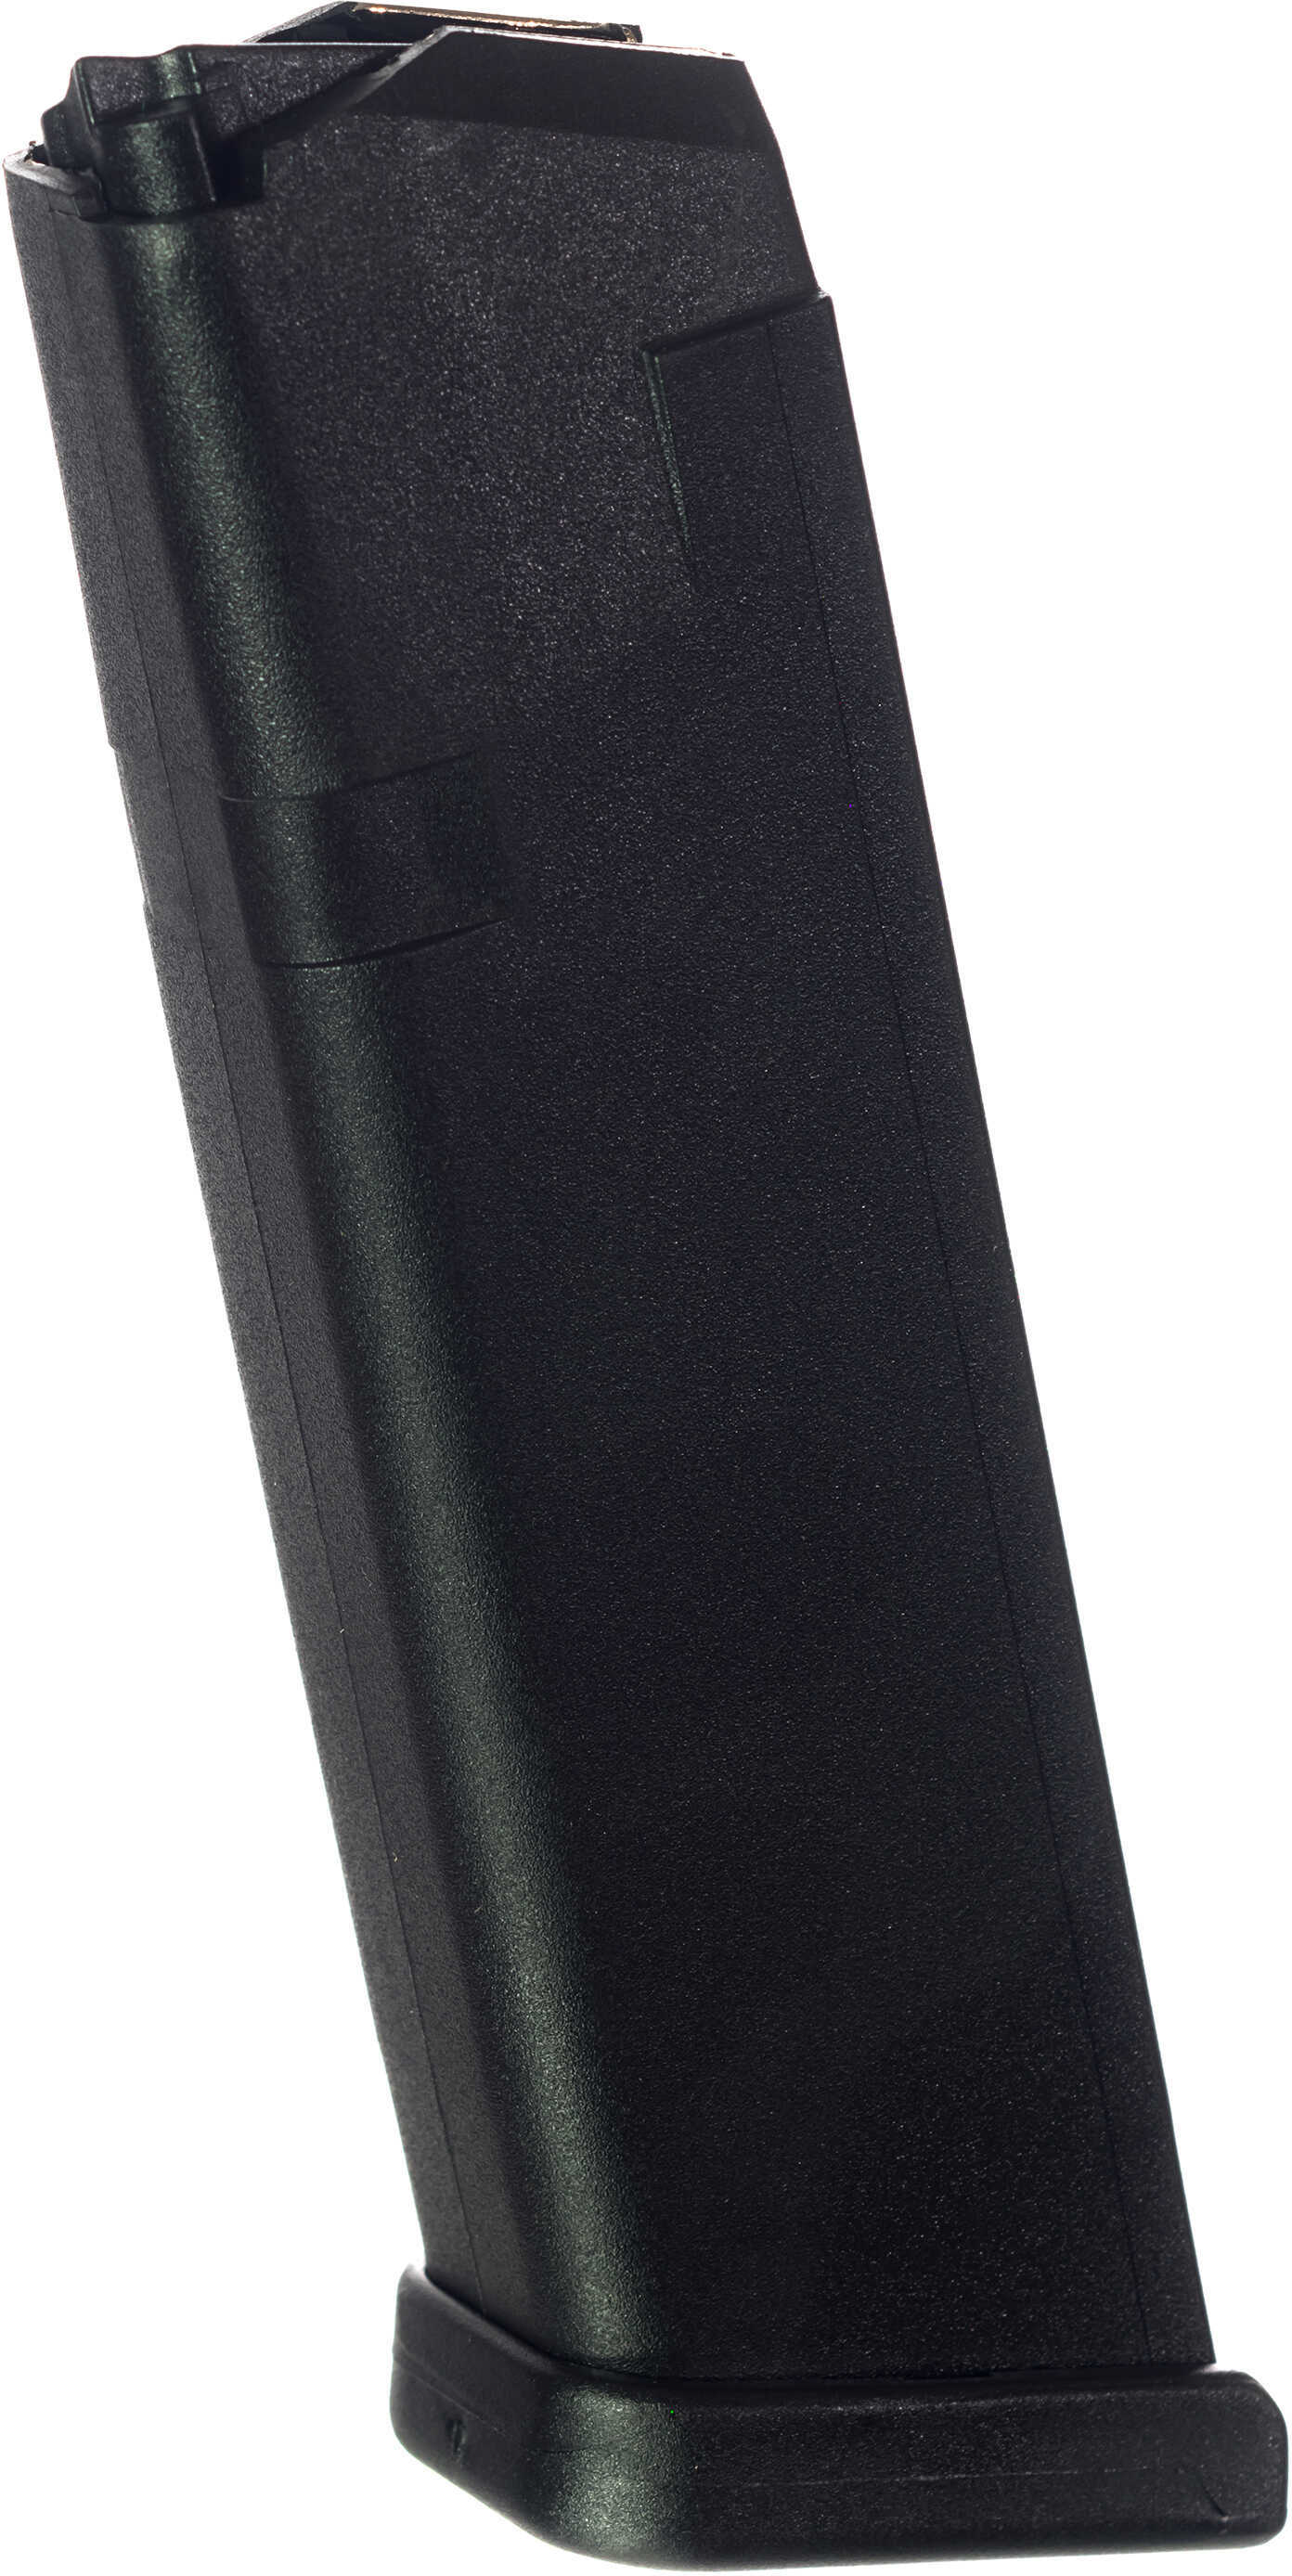 Polymer MAGAZINES 9MM For Glock~ 17/19/26